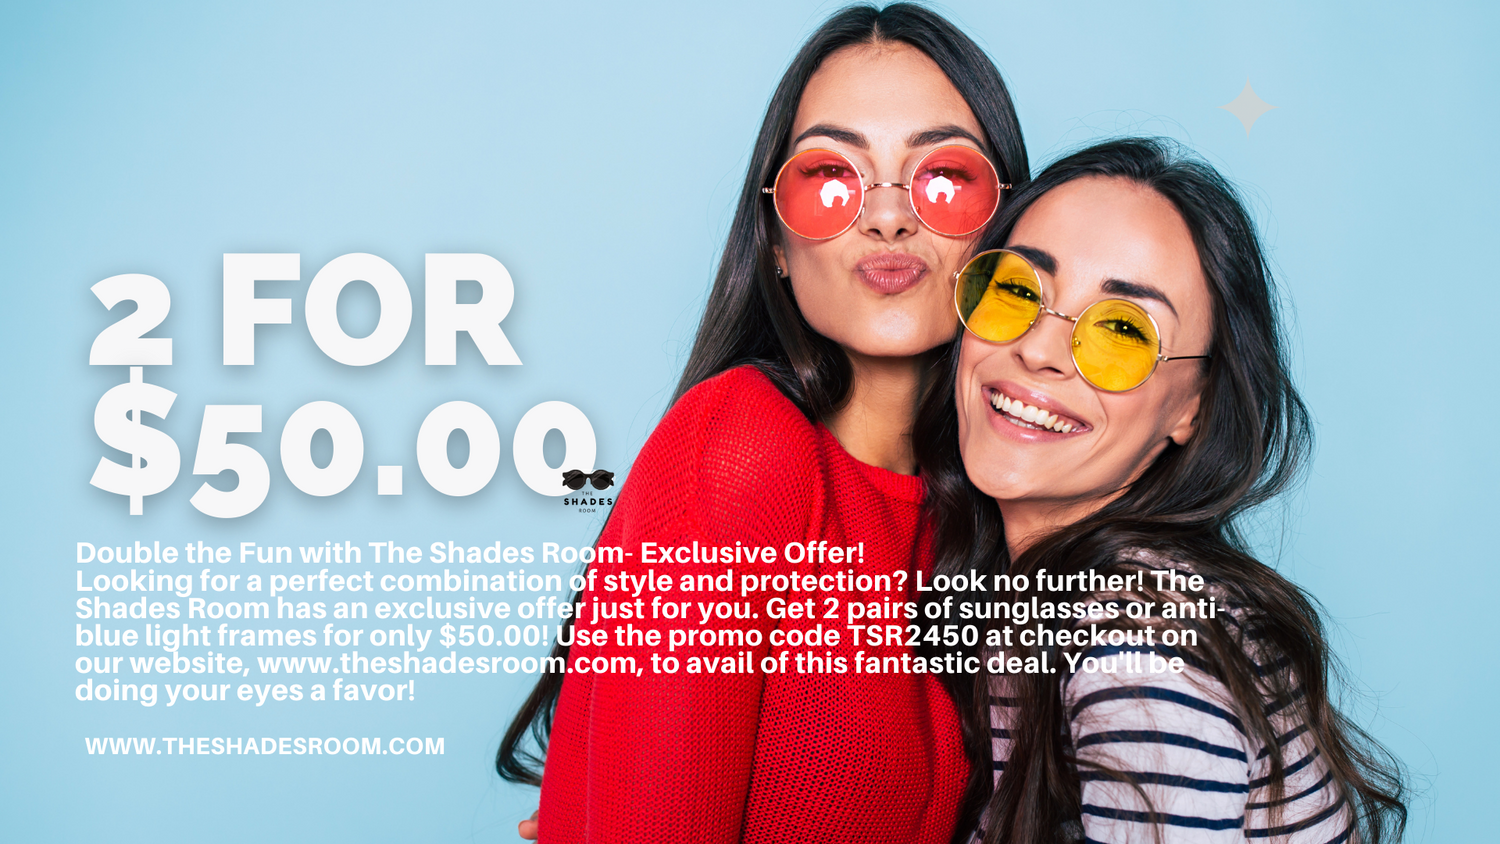 GET 2 PAIRS OF SUNGLASSES OR BLUE LIGHT SHADES FOR $50+FREE SHIPPING!